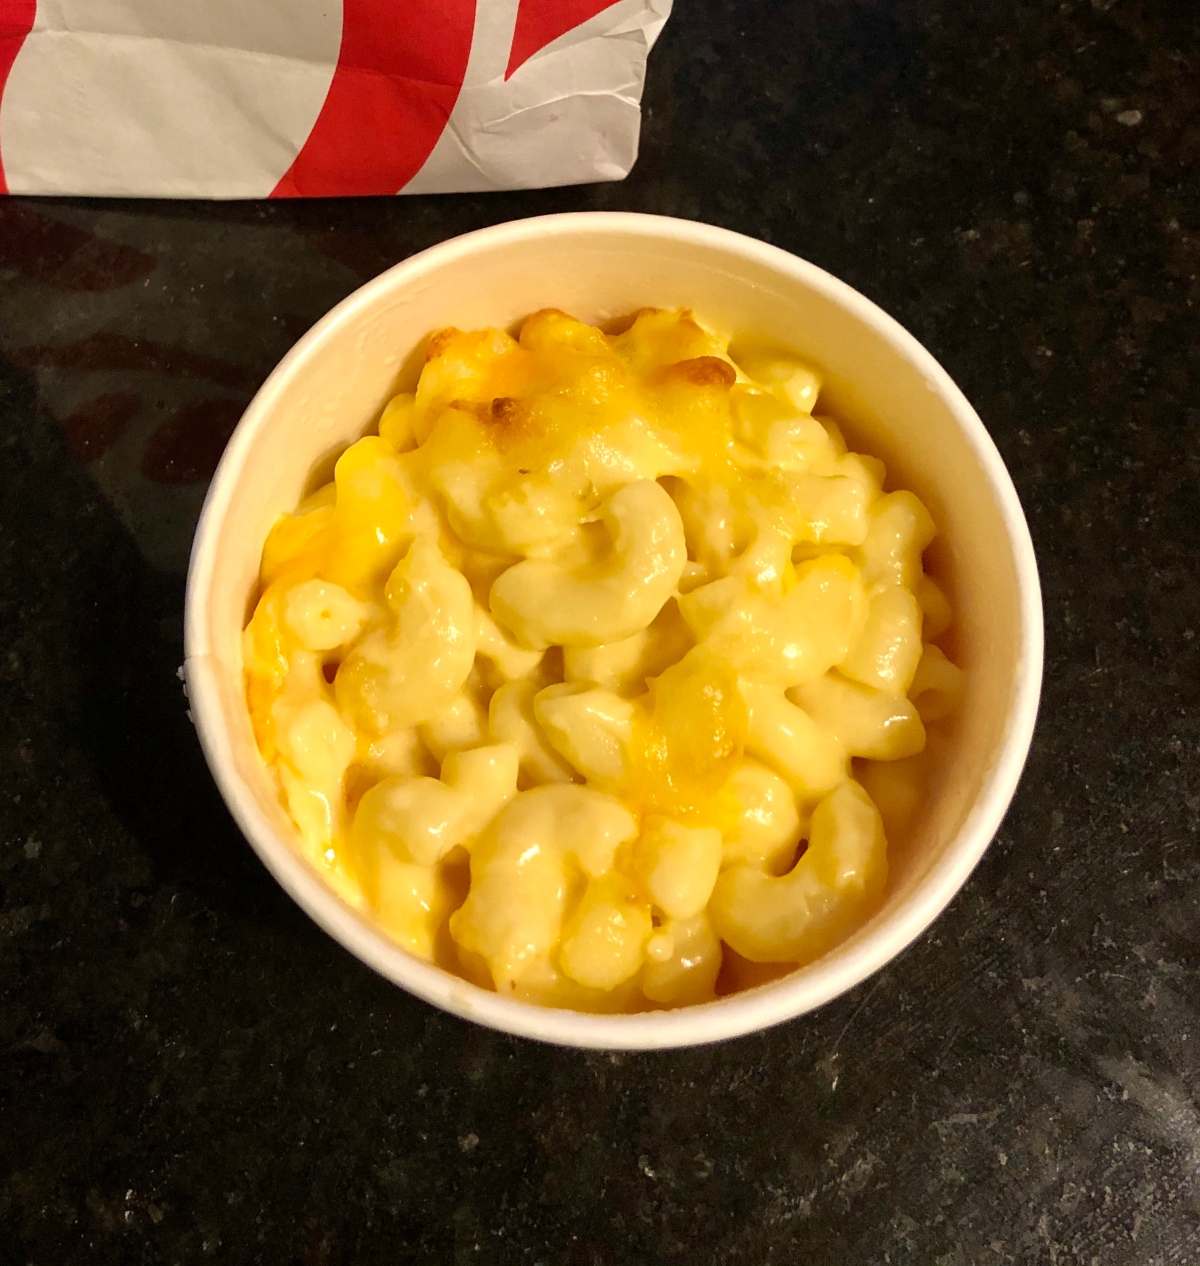 An Honest Review of Chick-Fil-A’s Mac and Cheese